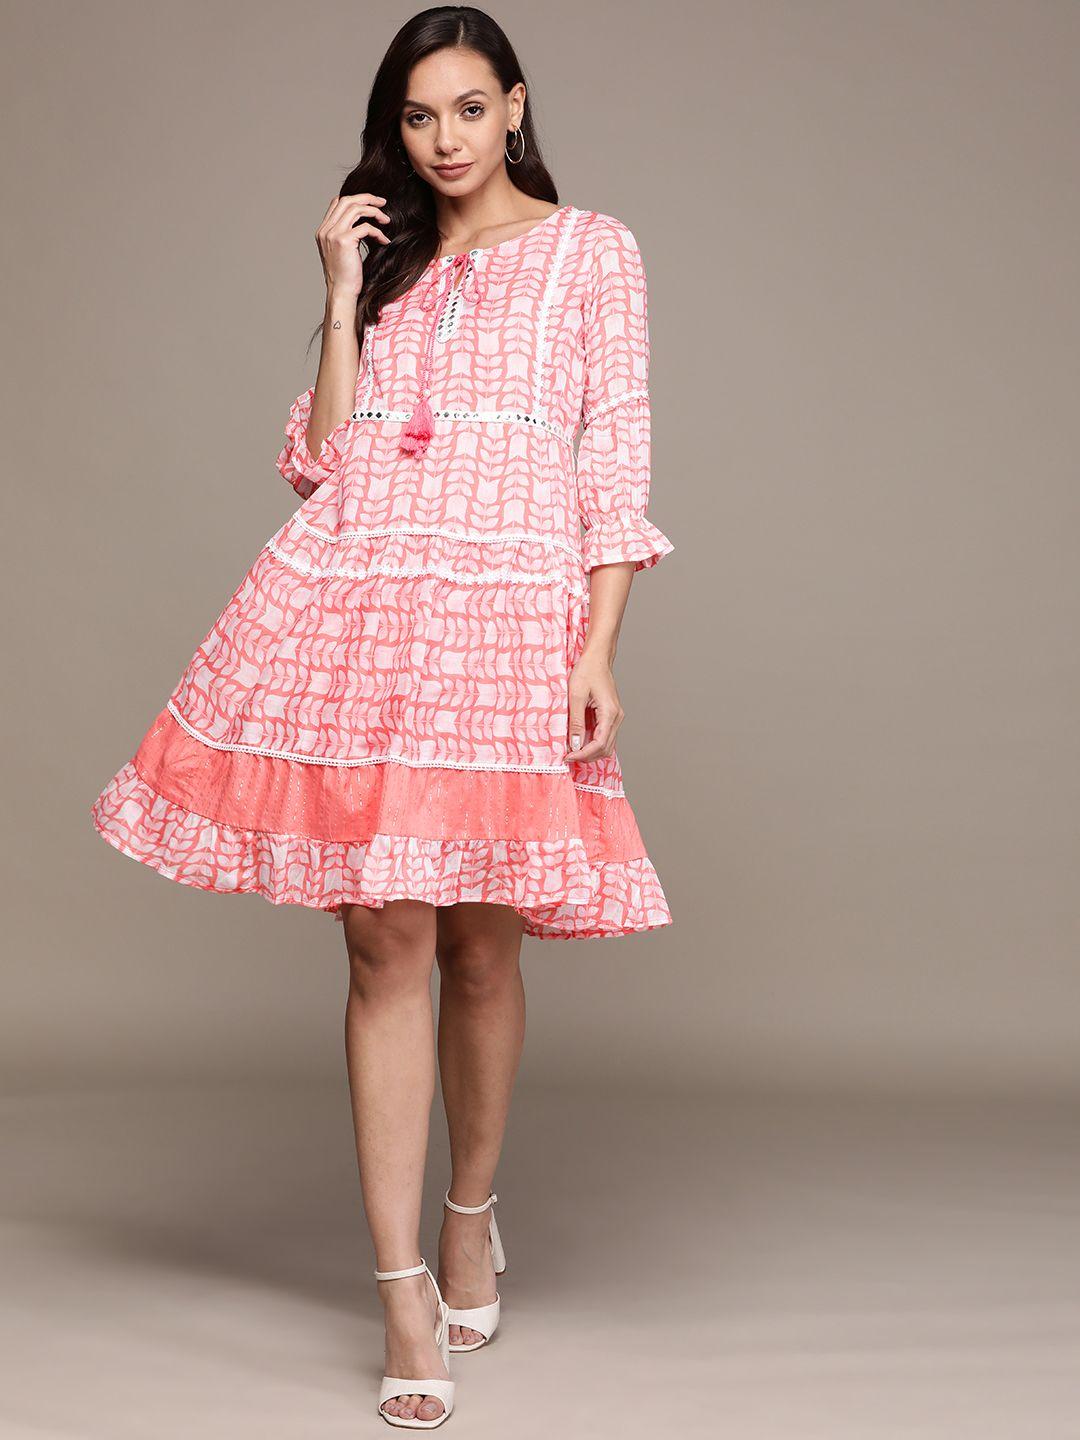 ishin-coral-pink-&-white-ethnic-motifs-printed-embellished-tie-up-neck-cotton-a-line-dress